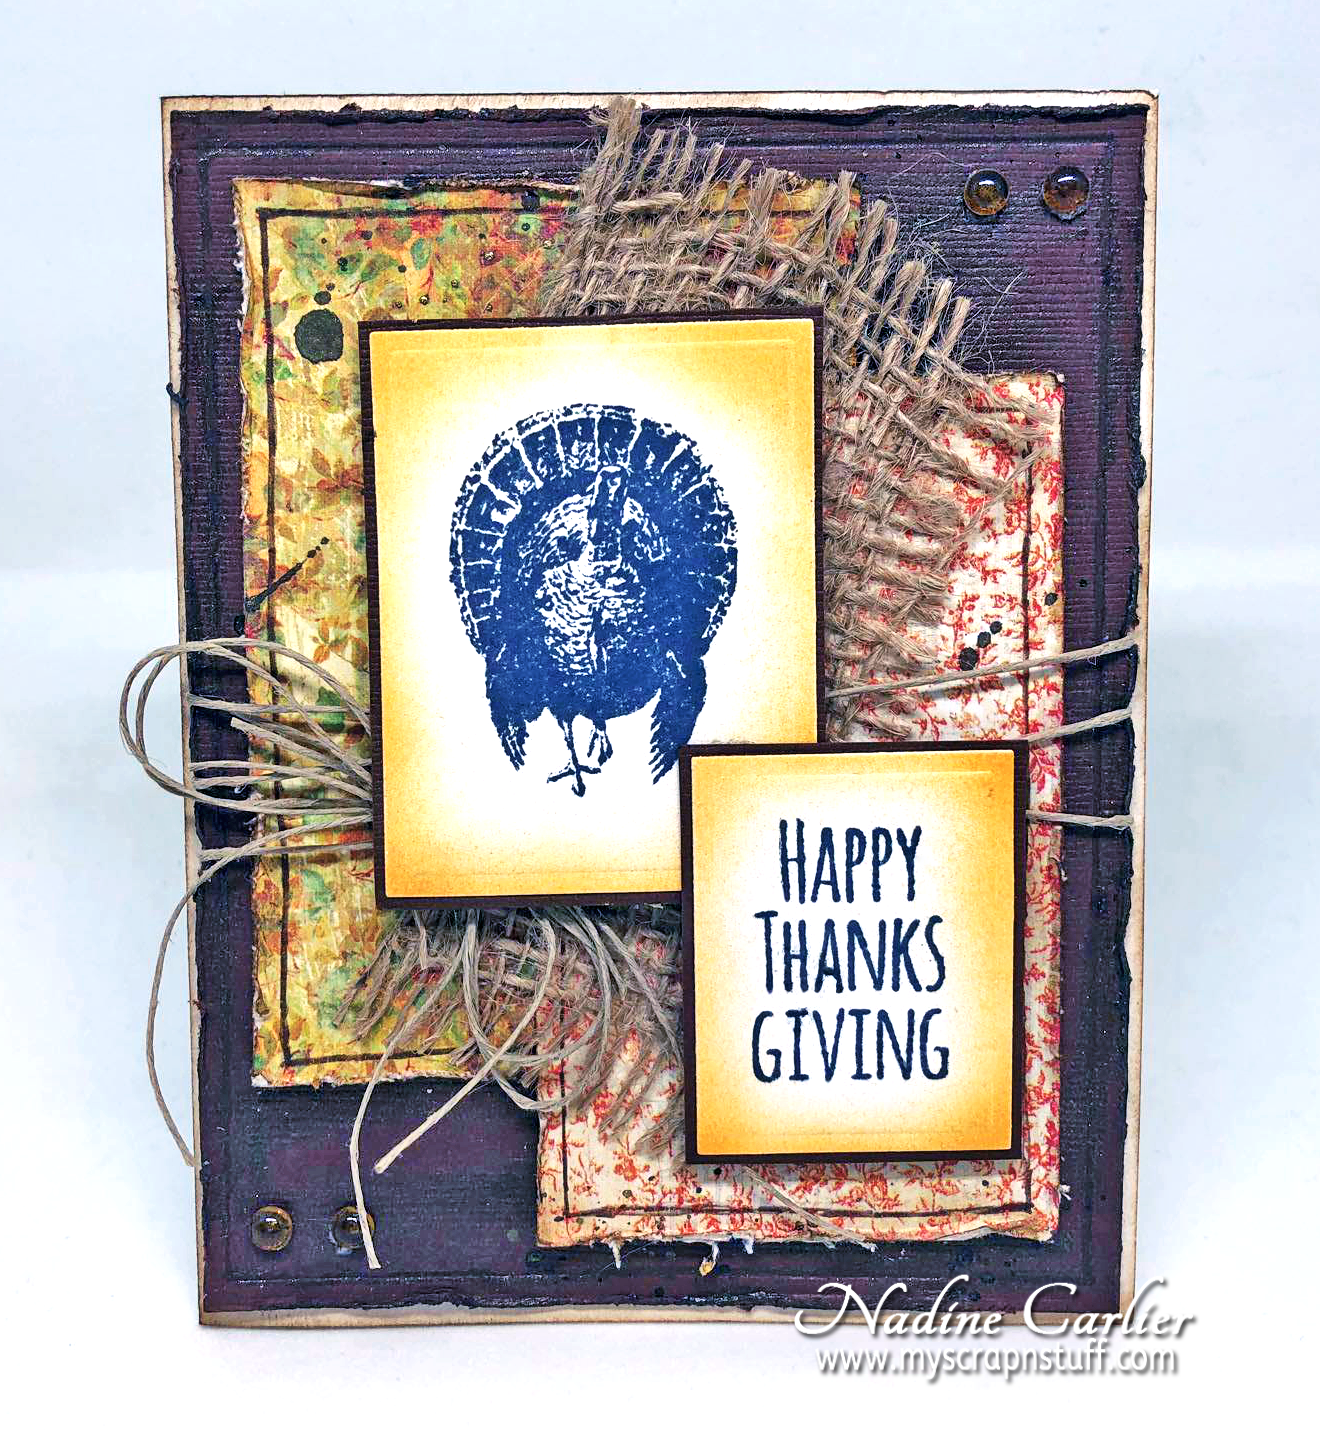 Happy Thanksgiving Card with Brutus Monroe by Nadine Carlier